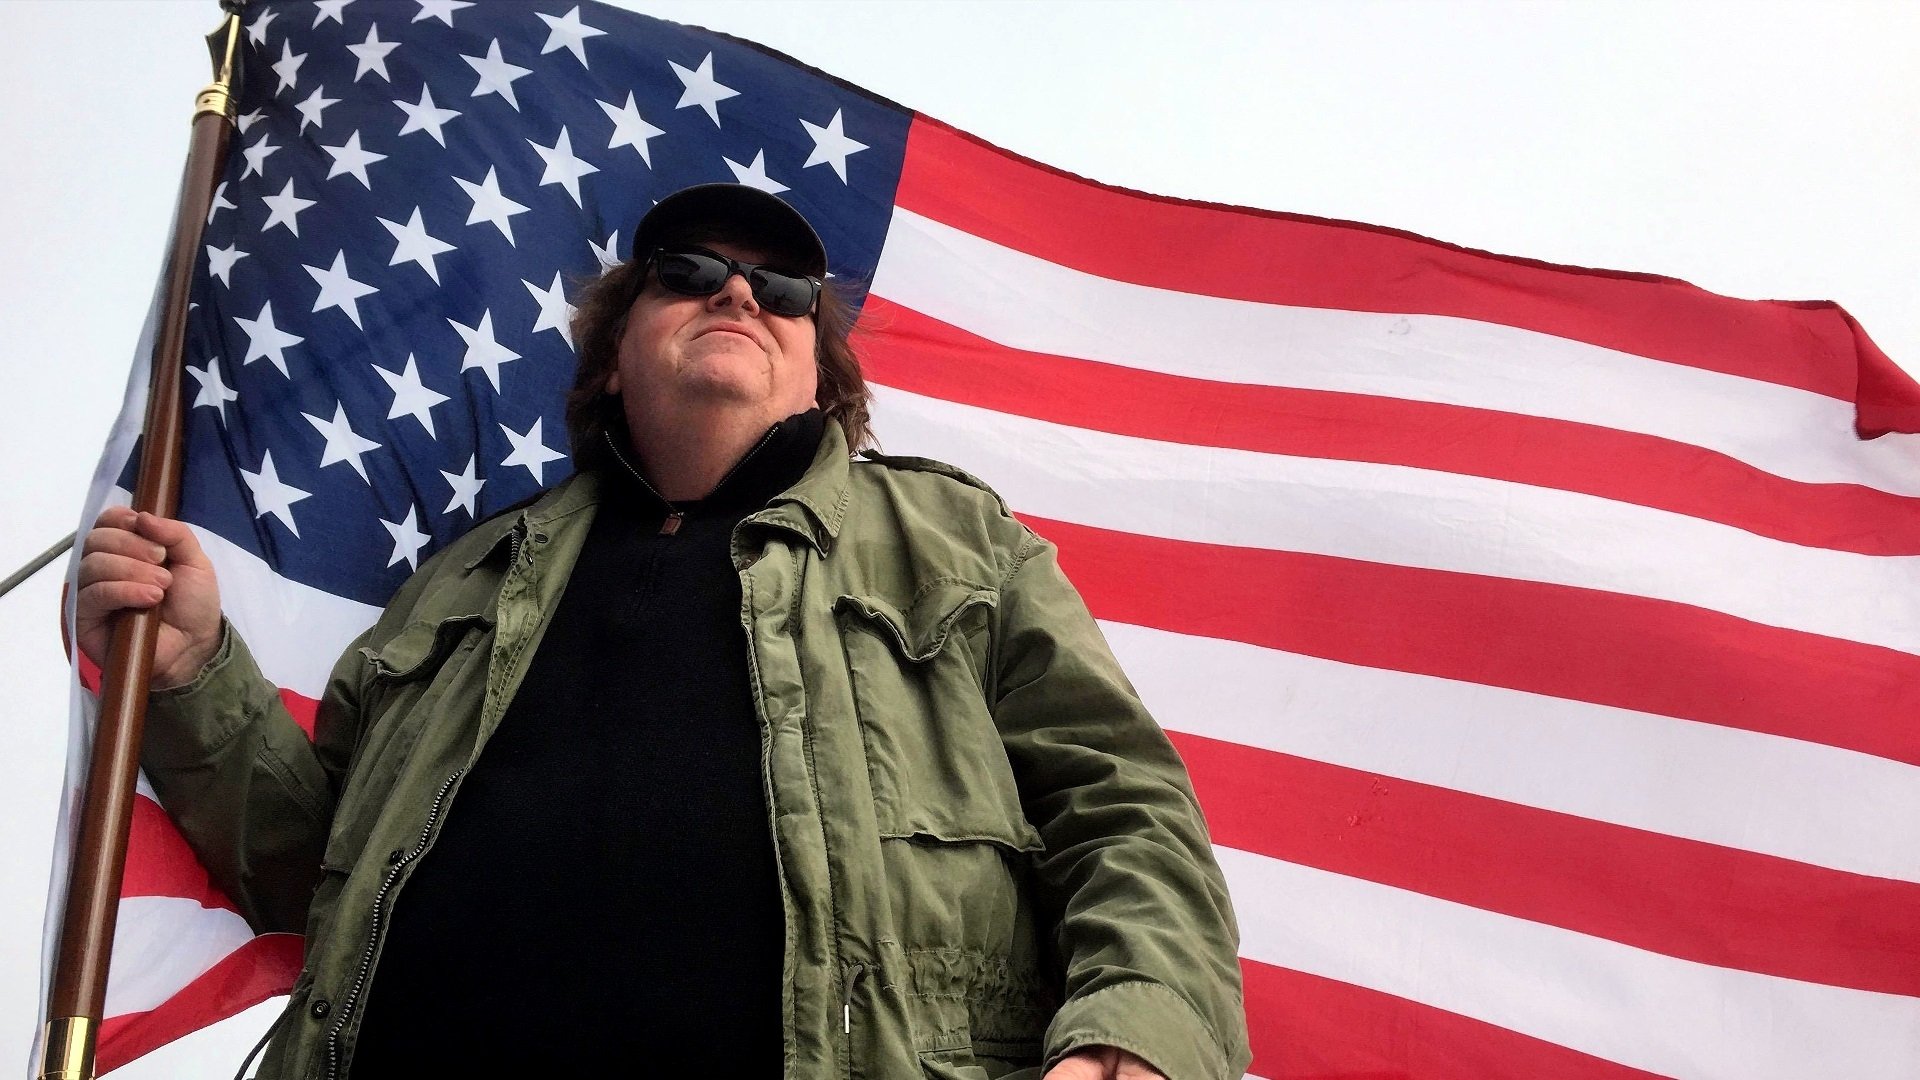 This Christmas Michael Moore's film "Where to Invade Next" will be released